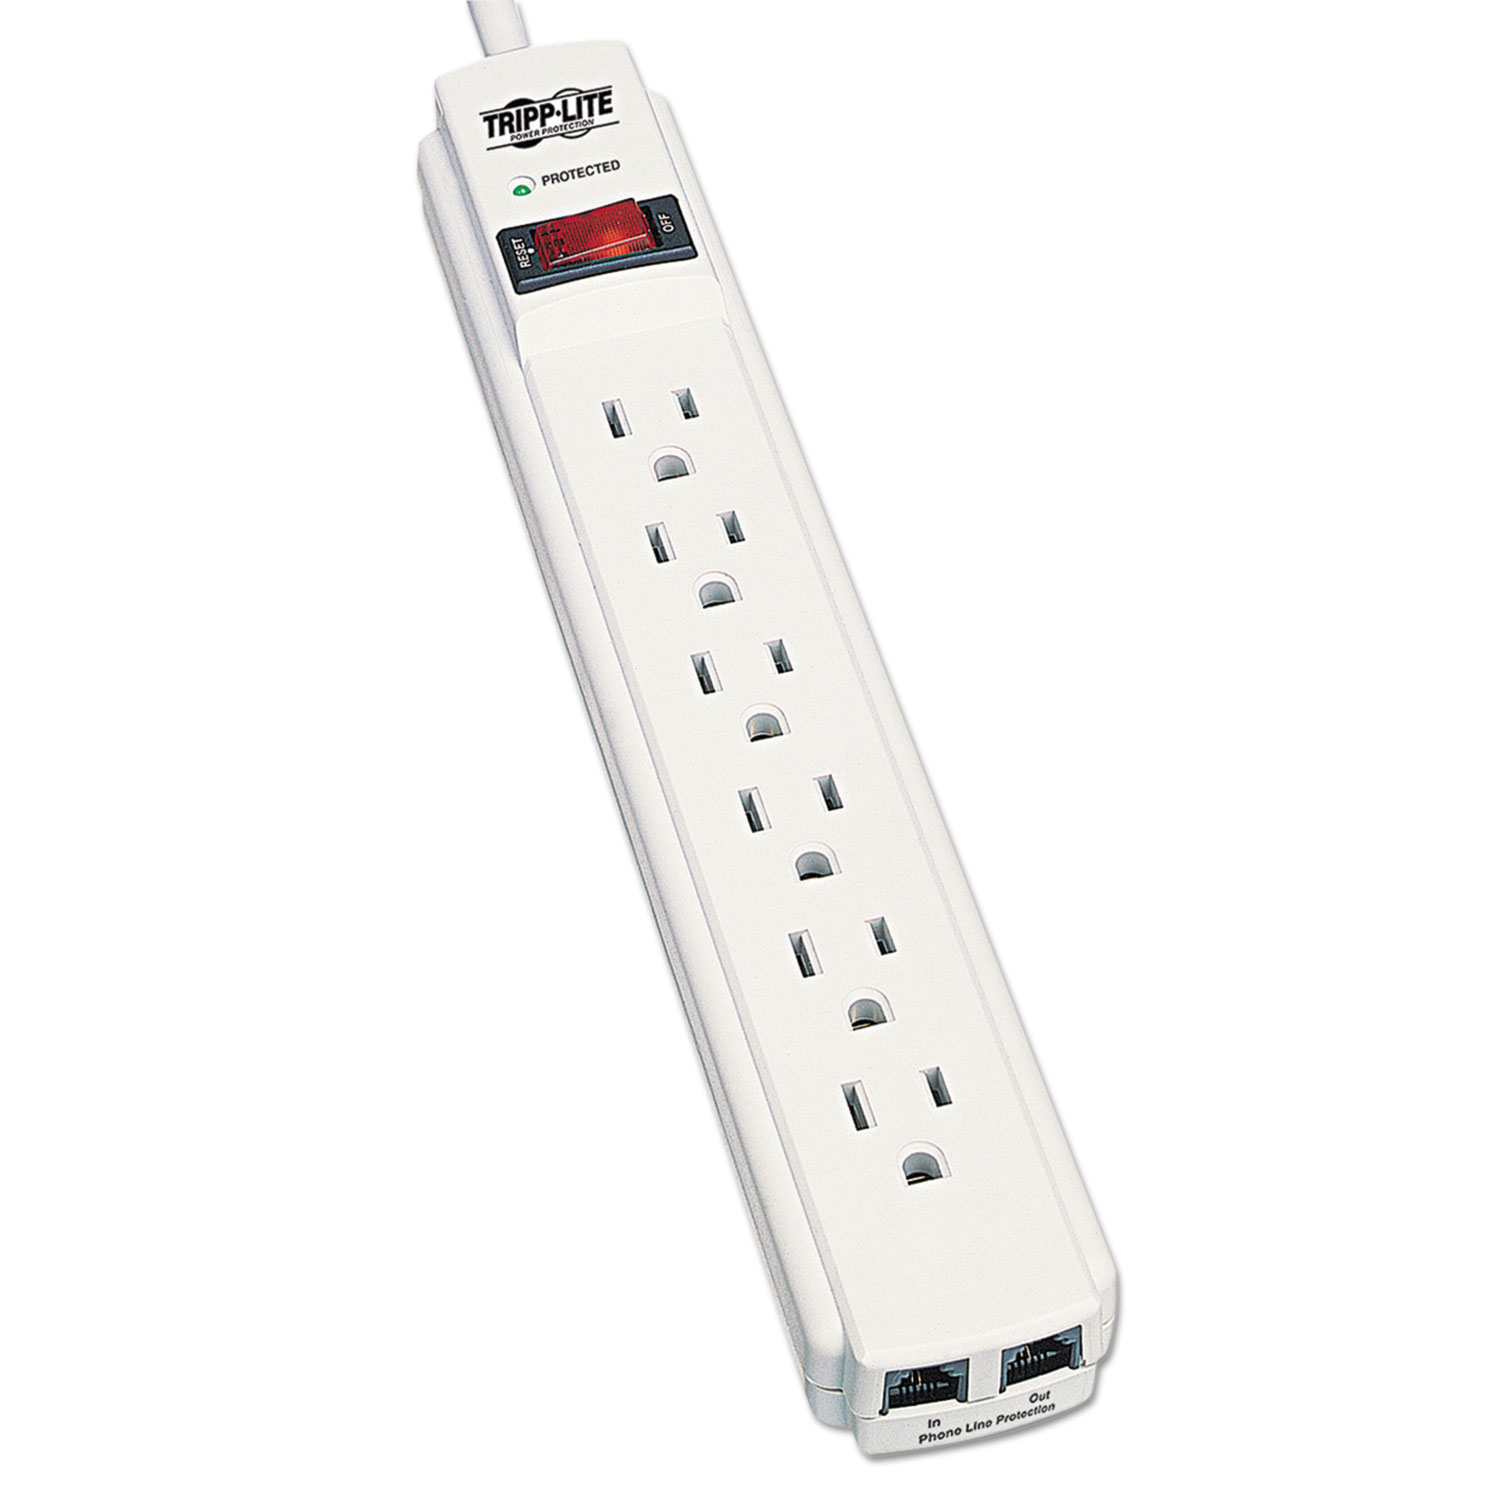 TLP604TEL Surge Suppressor, 6 Outlets, 4 ft Cord, 790 Joules, Light Gray